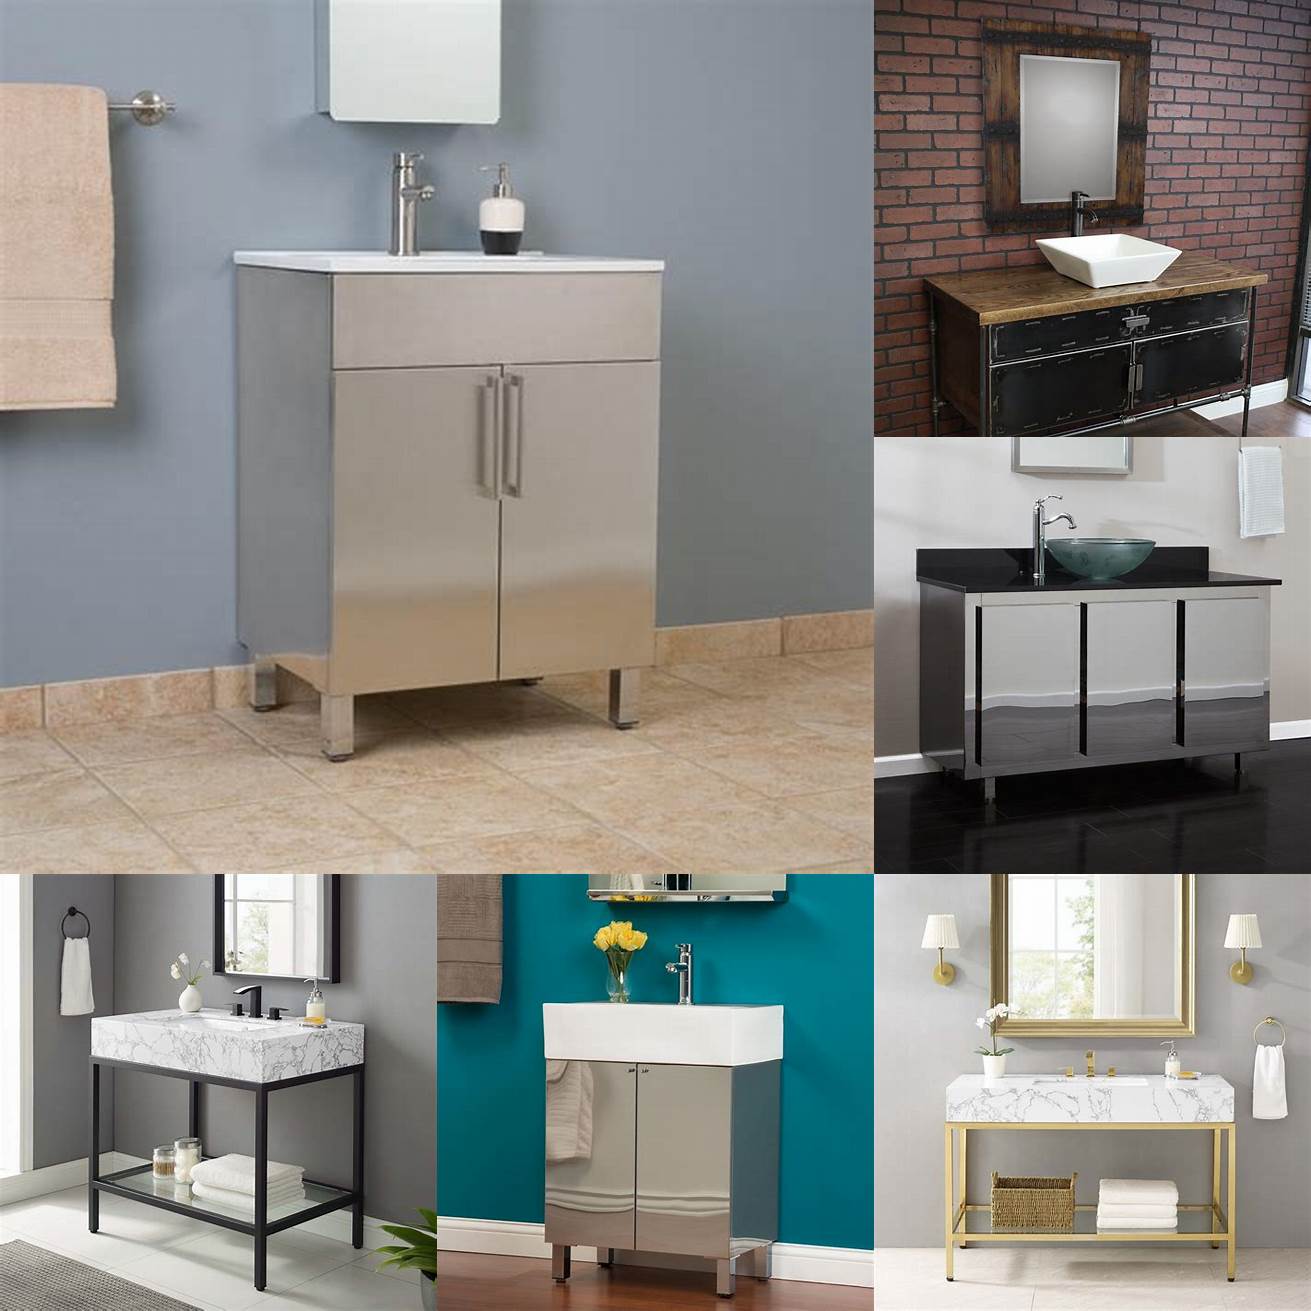 Metal Metal vanities like those made from stainless steel or brass can add an industrial or modern touch to your bathroom